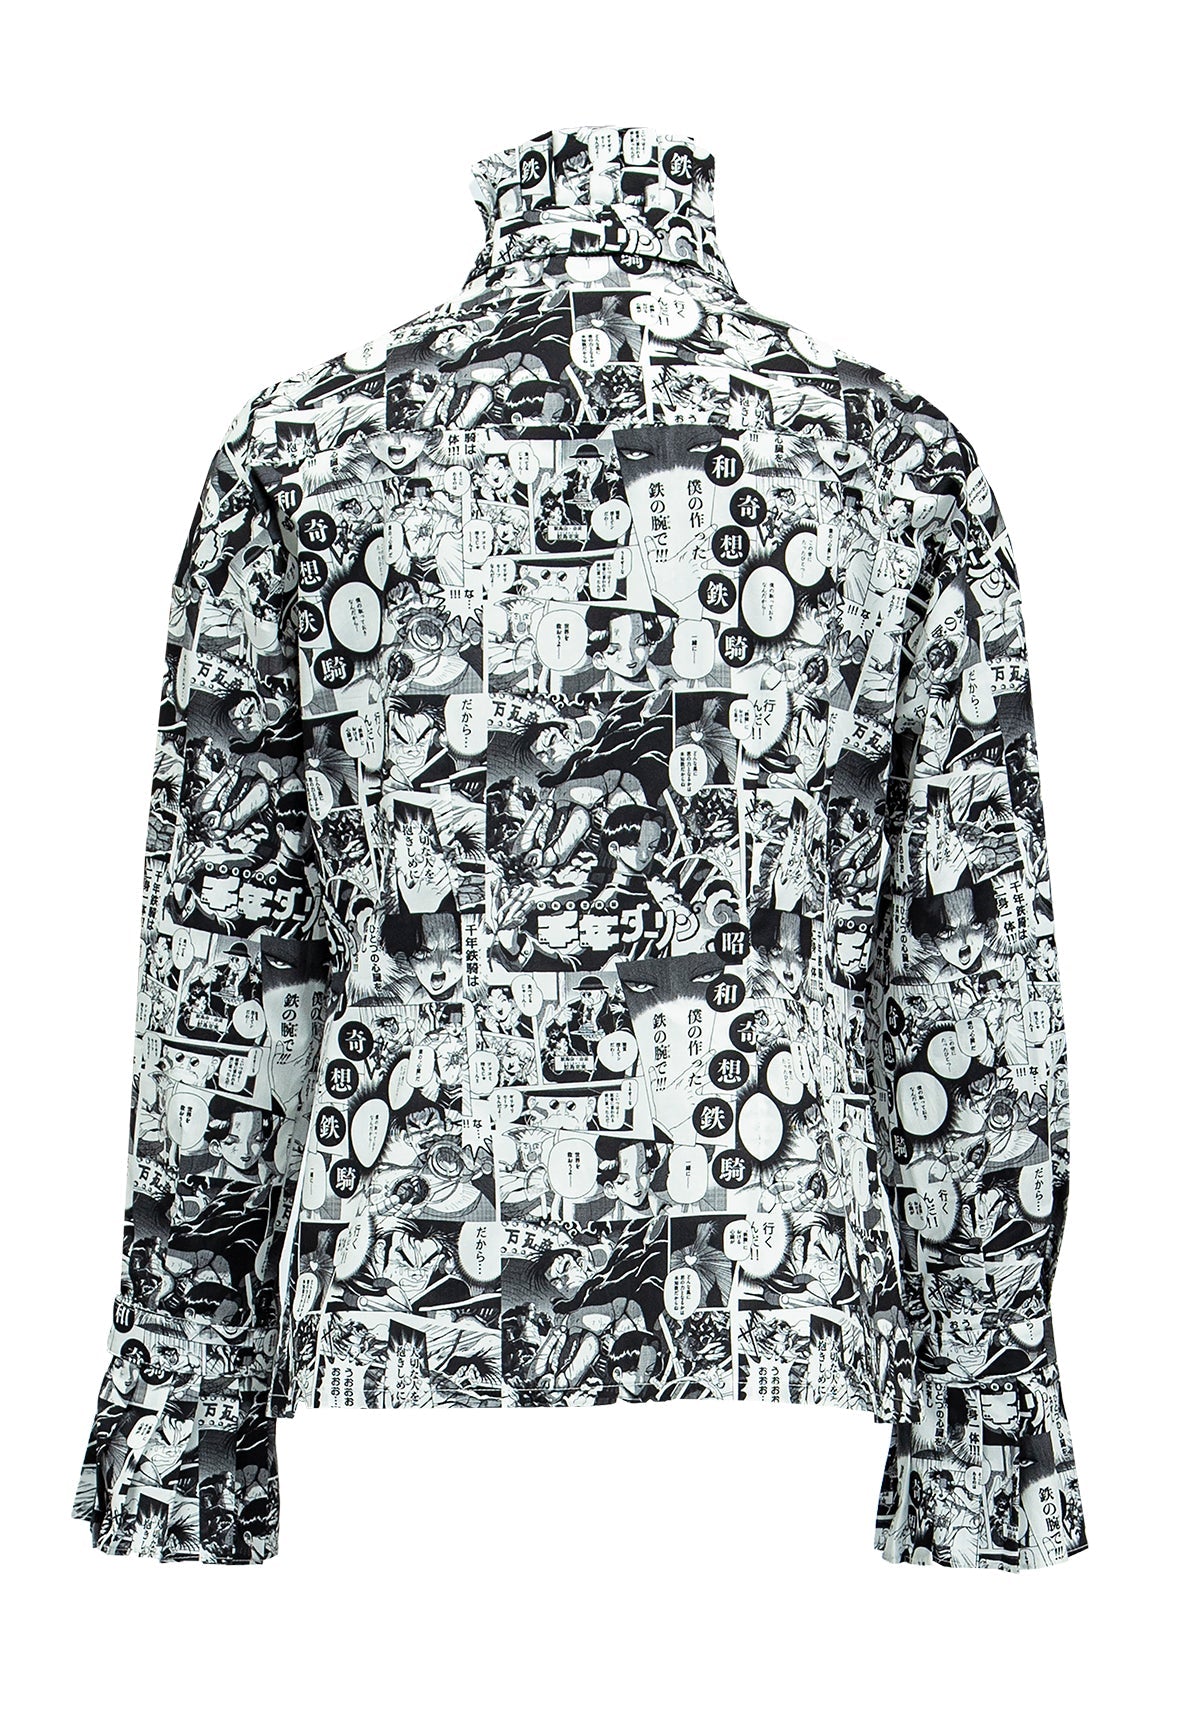 Chelsea - Cotton Blouse in  Comic Print W/ Pleated Collar & Long Bow Tie